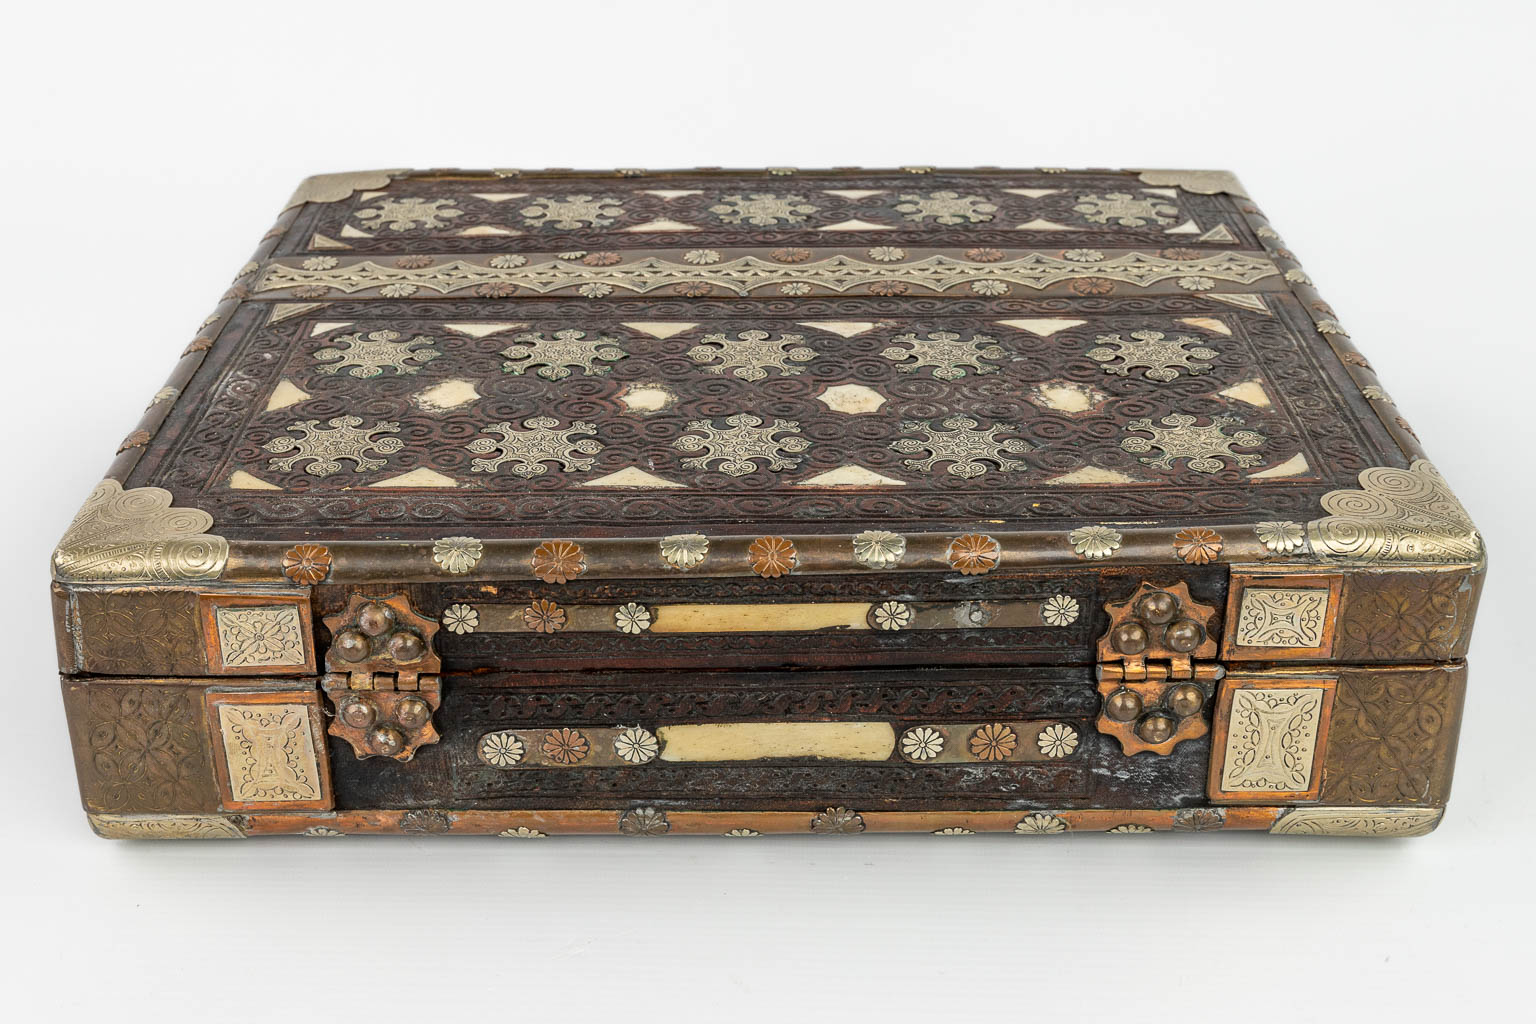 A document case in Oriental style, inlaid with metal and mother of pearl. 19th century. (H:10cm)